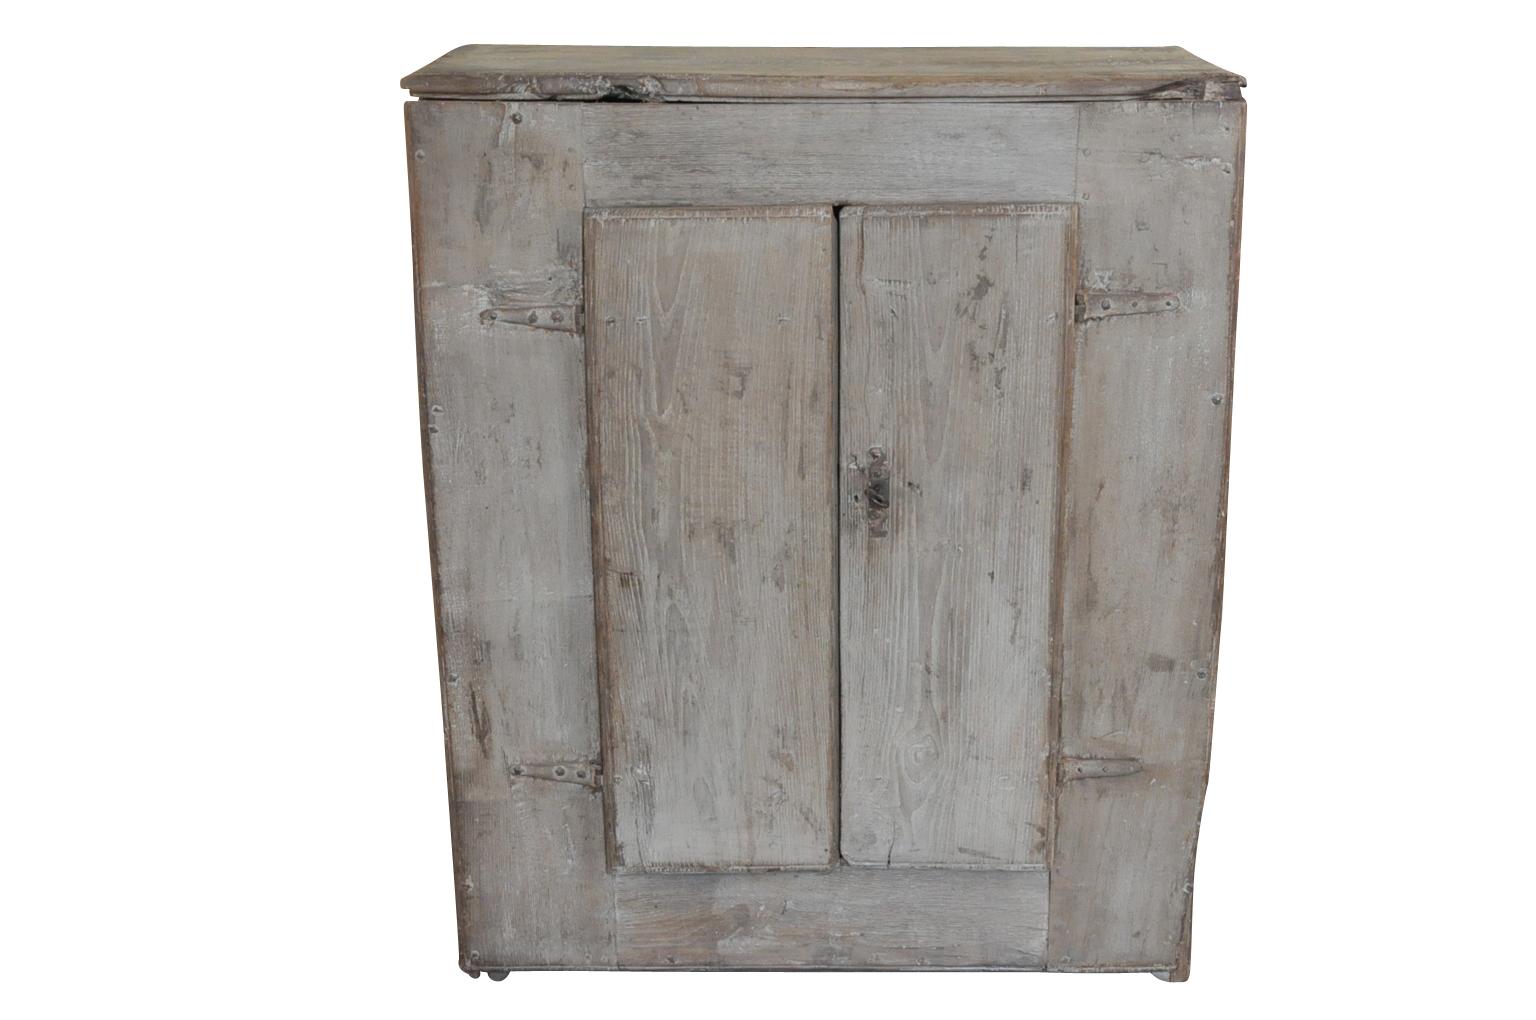 A very charming and primitive cupboard from the Catalan region of Spain. Soundly constructed from painted oak with an fabulous worn patina.